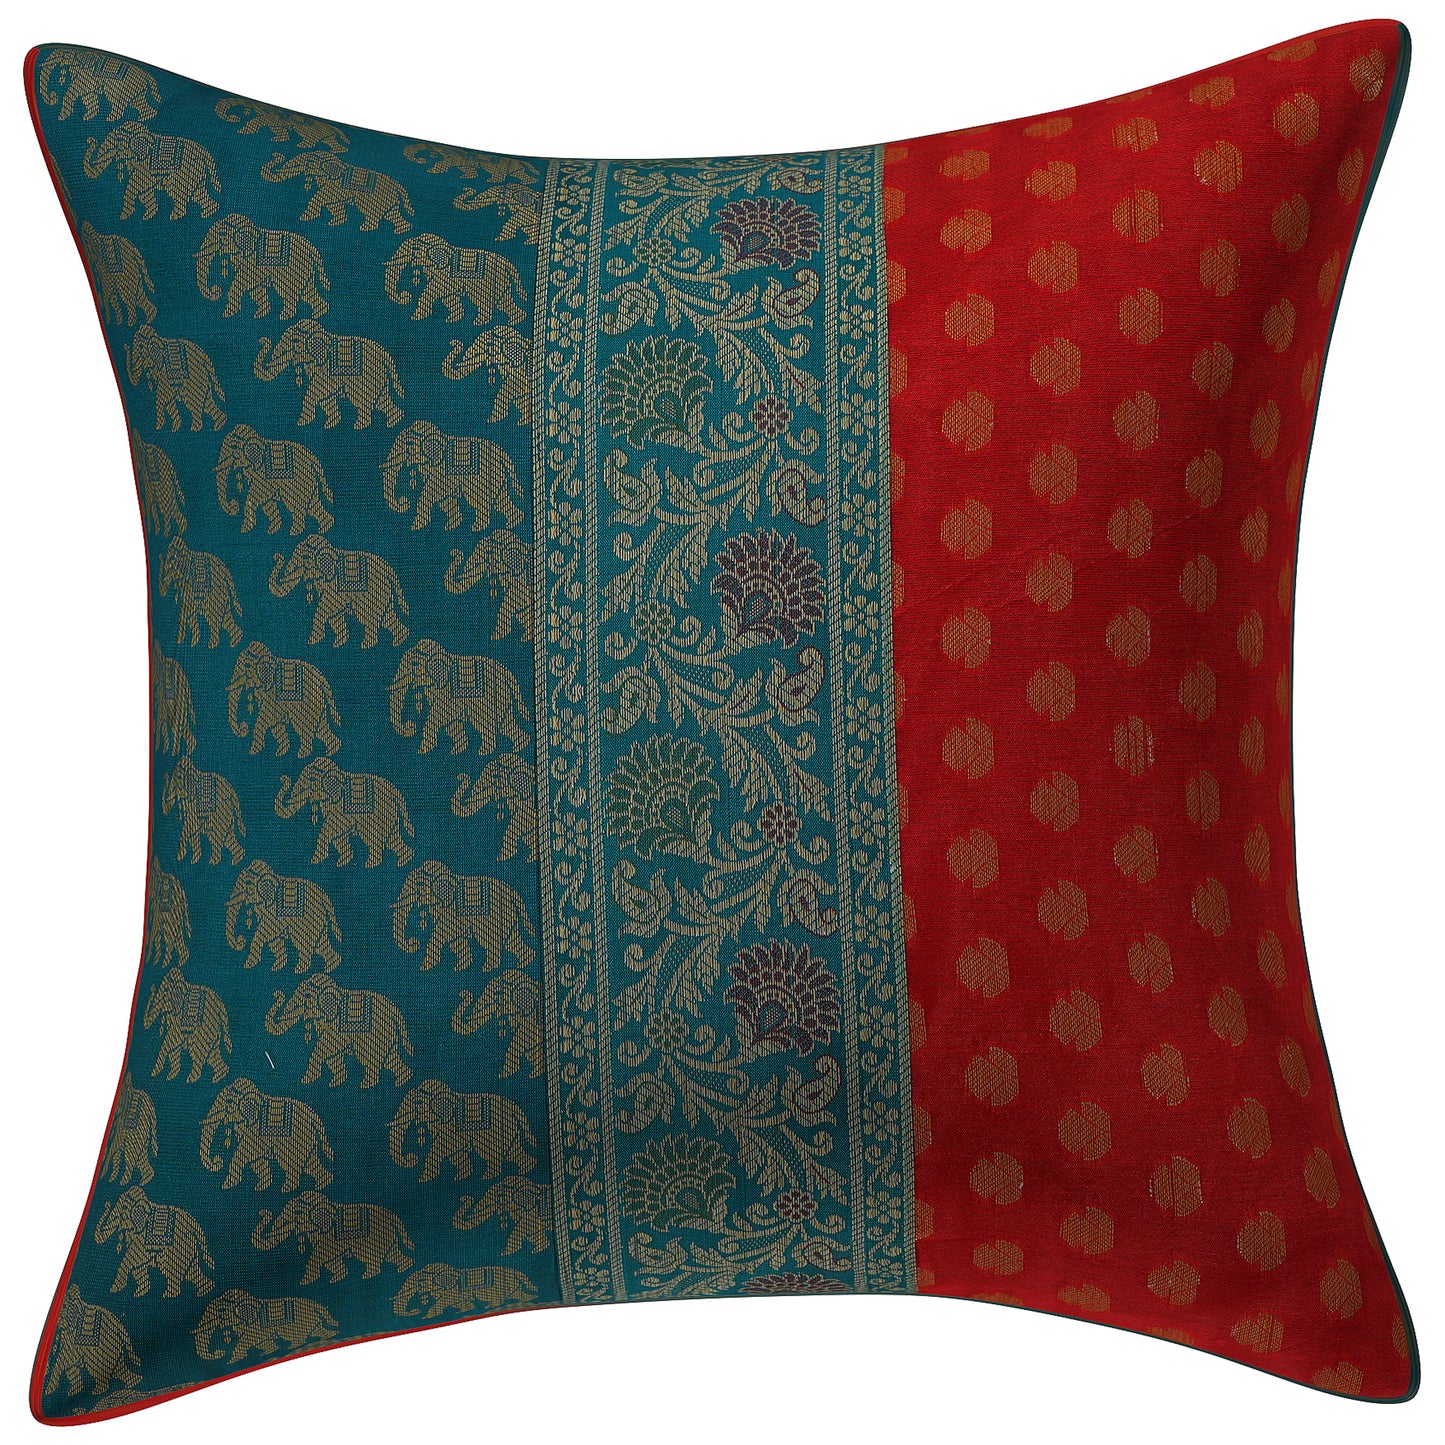 Indian Ethnic Brocade Silk Green & Red Elephant cushion Cover Throw Pillow for Couch Sofa Home Décor Pillow Cover 16X16 In Set 2 Pc